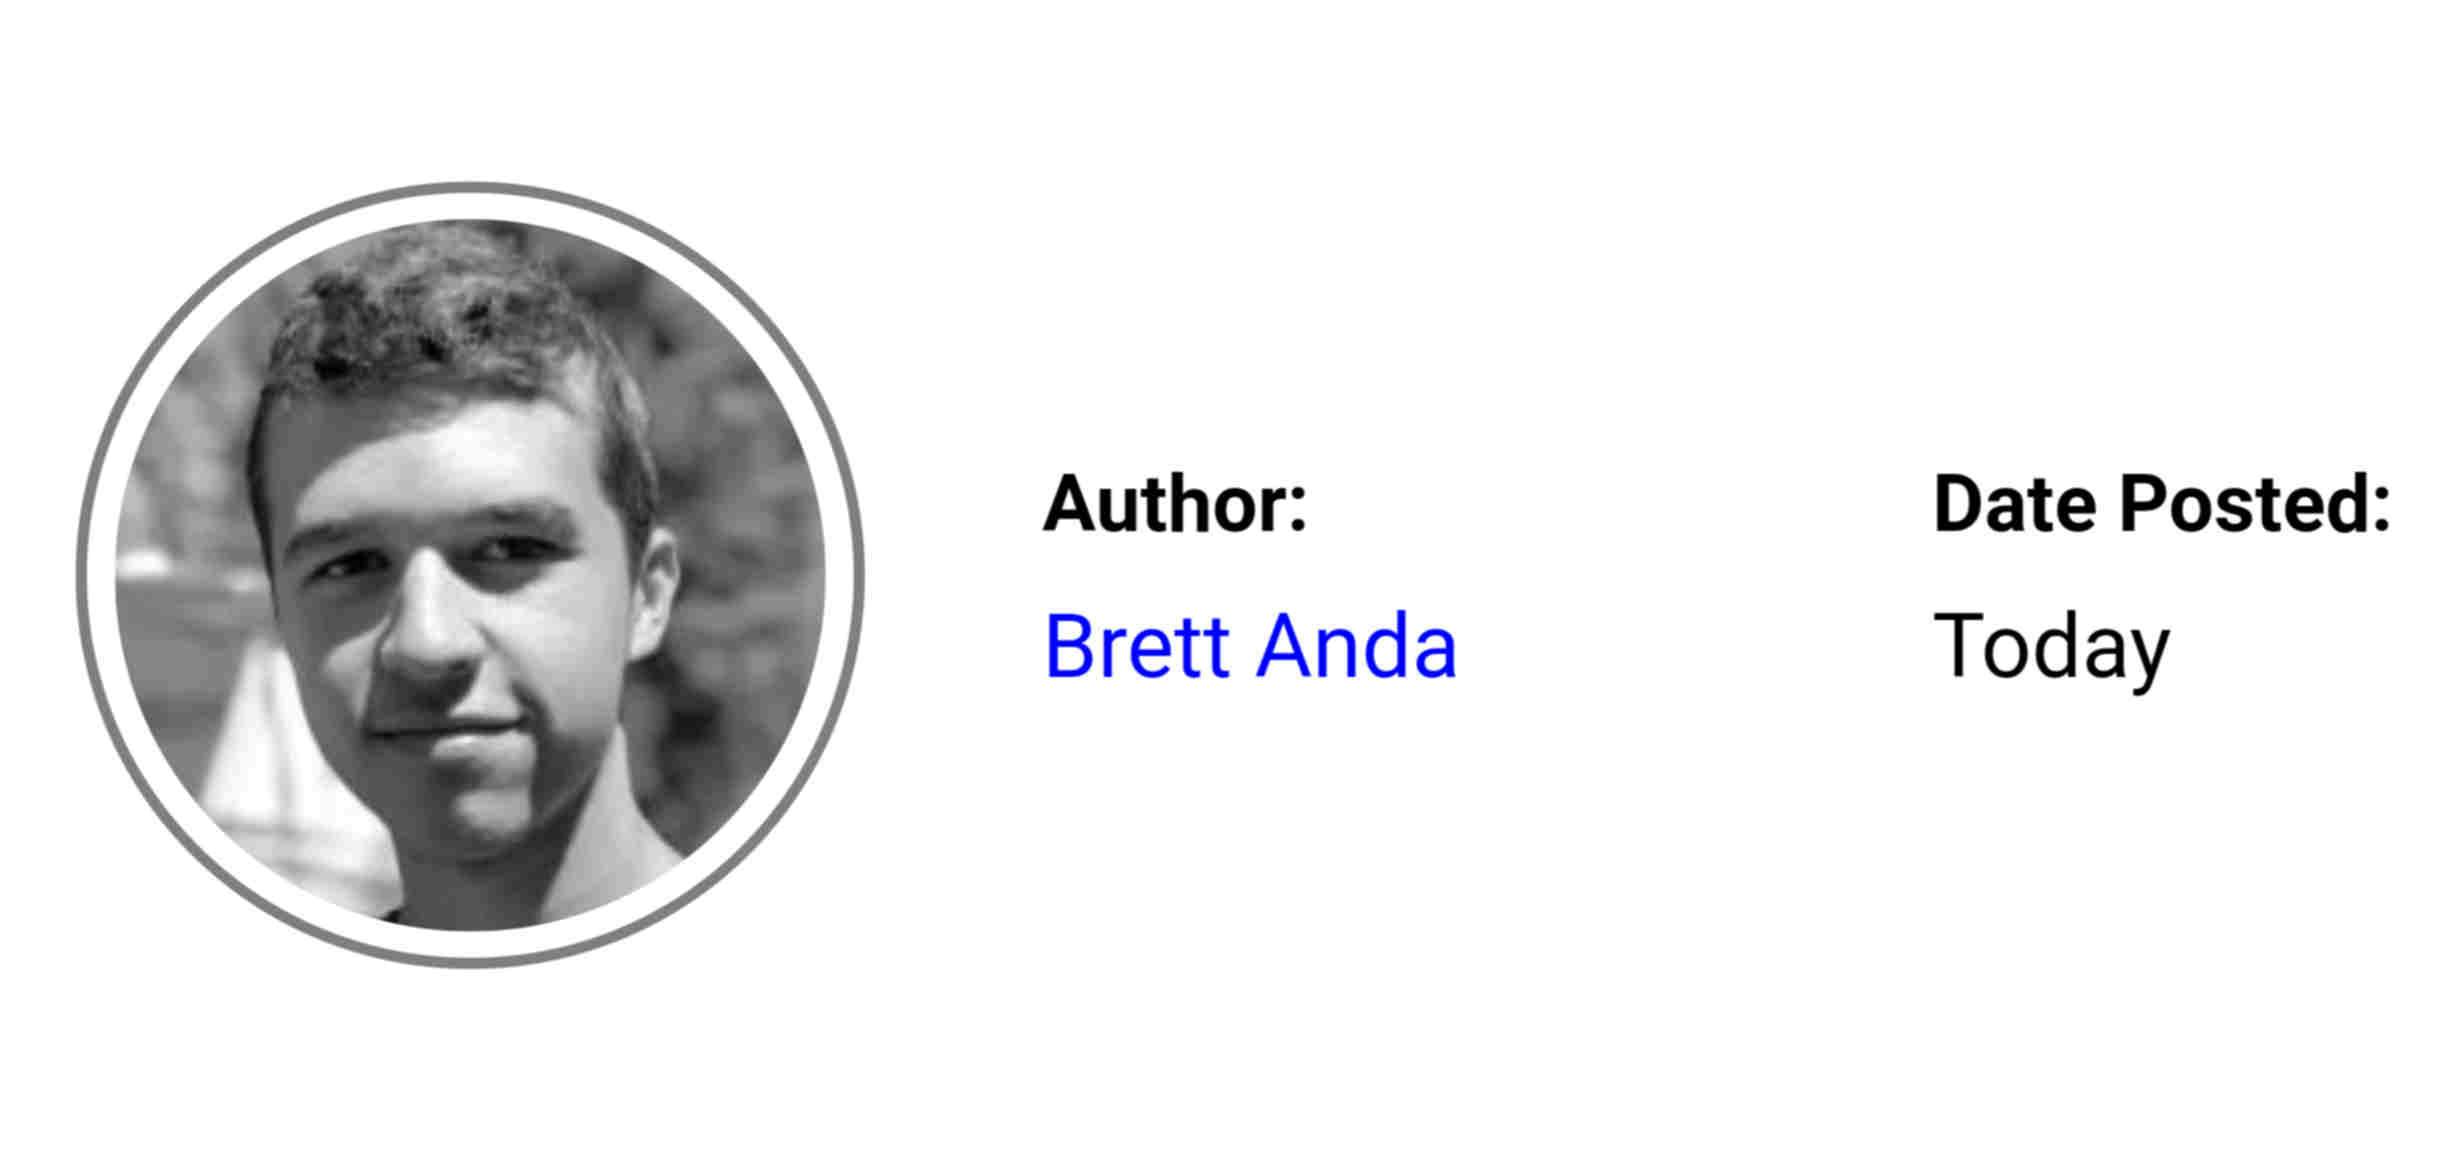 A simple author byline for Brett Anda